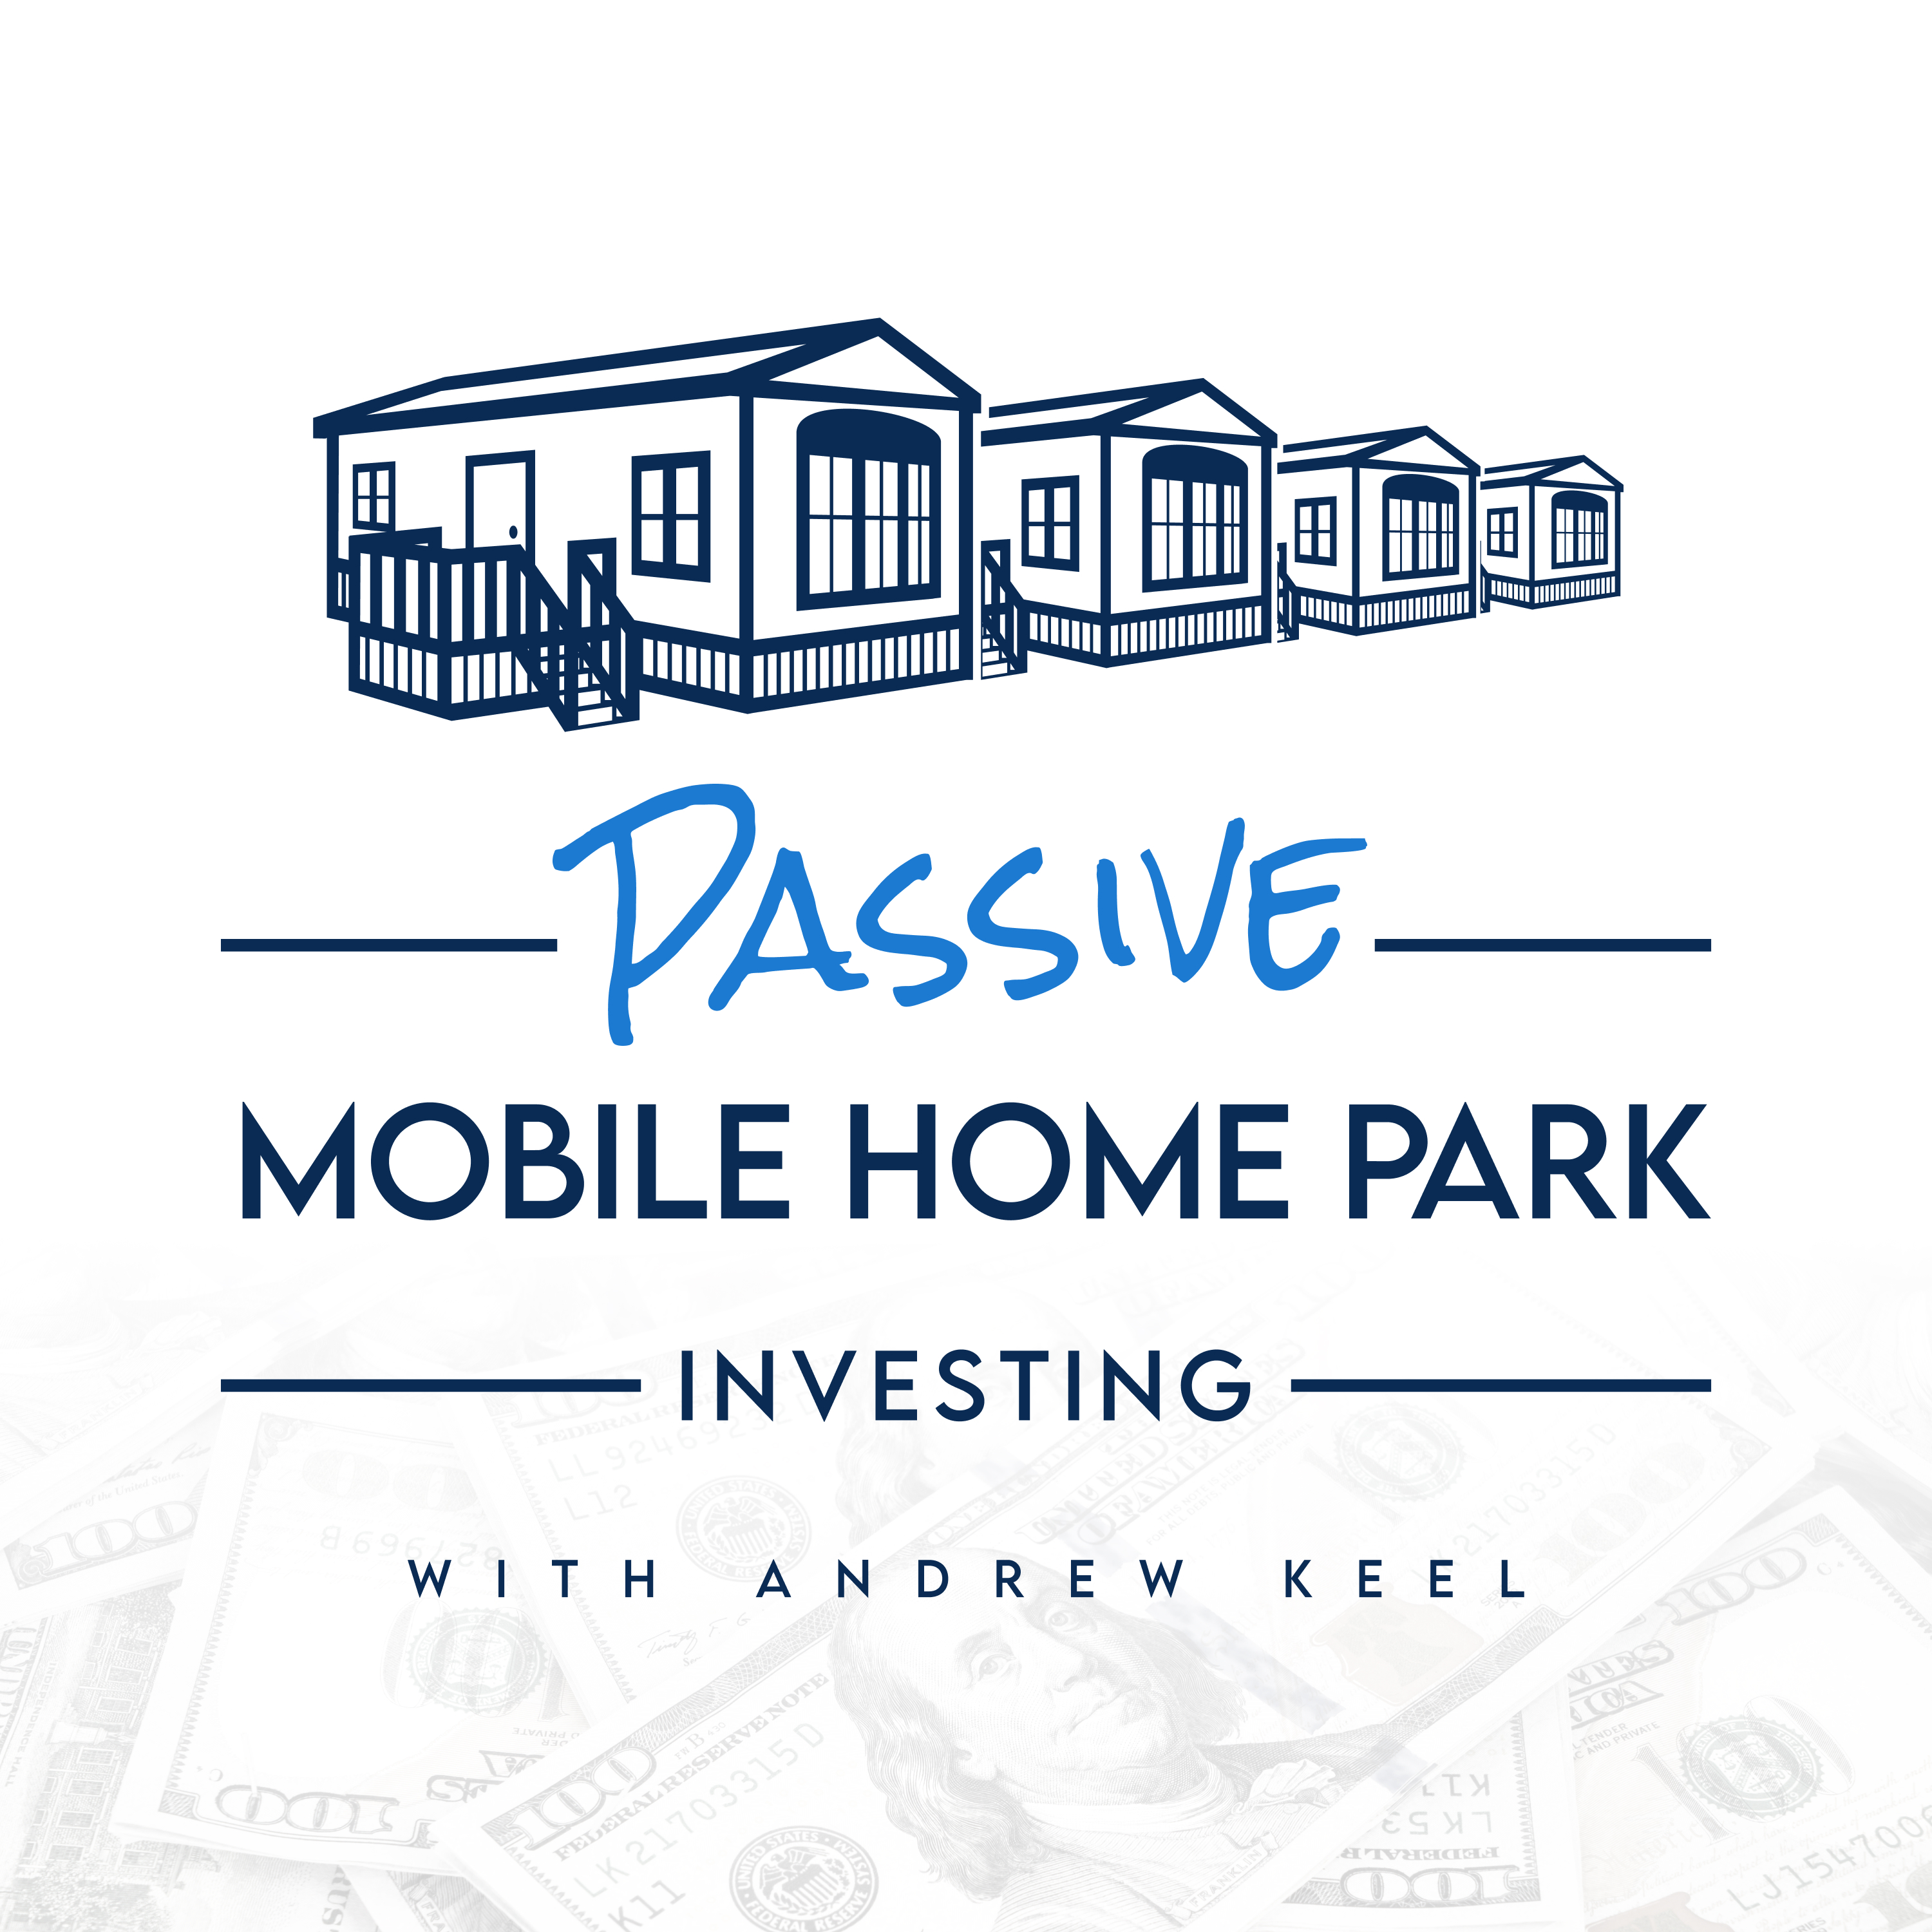 Interview with Tim Woodbridge- Healthcare Professional Turned Full-Time Mobile Home Park Investor